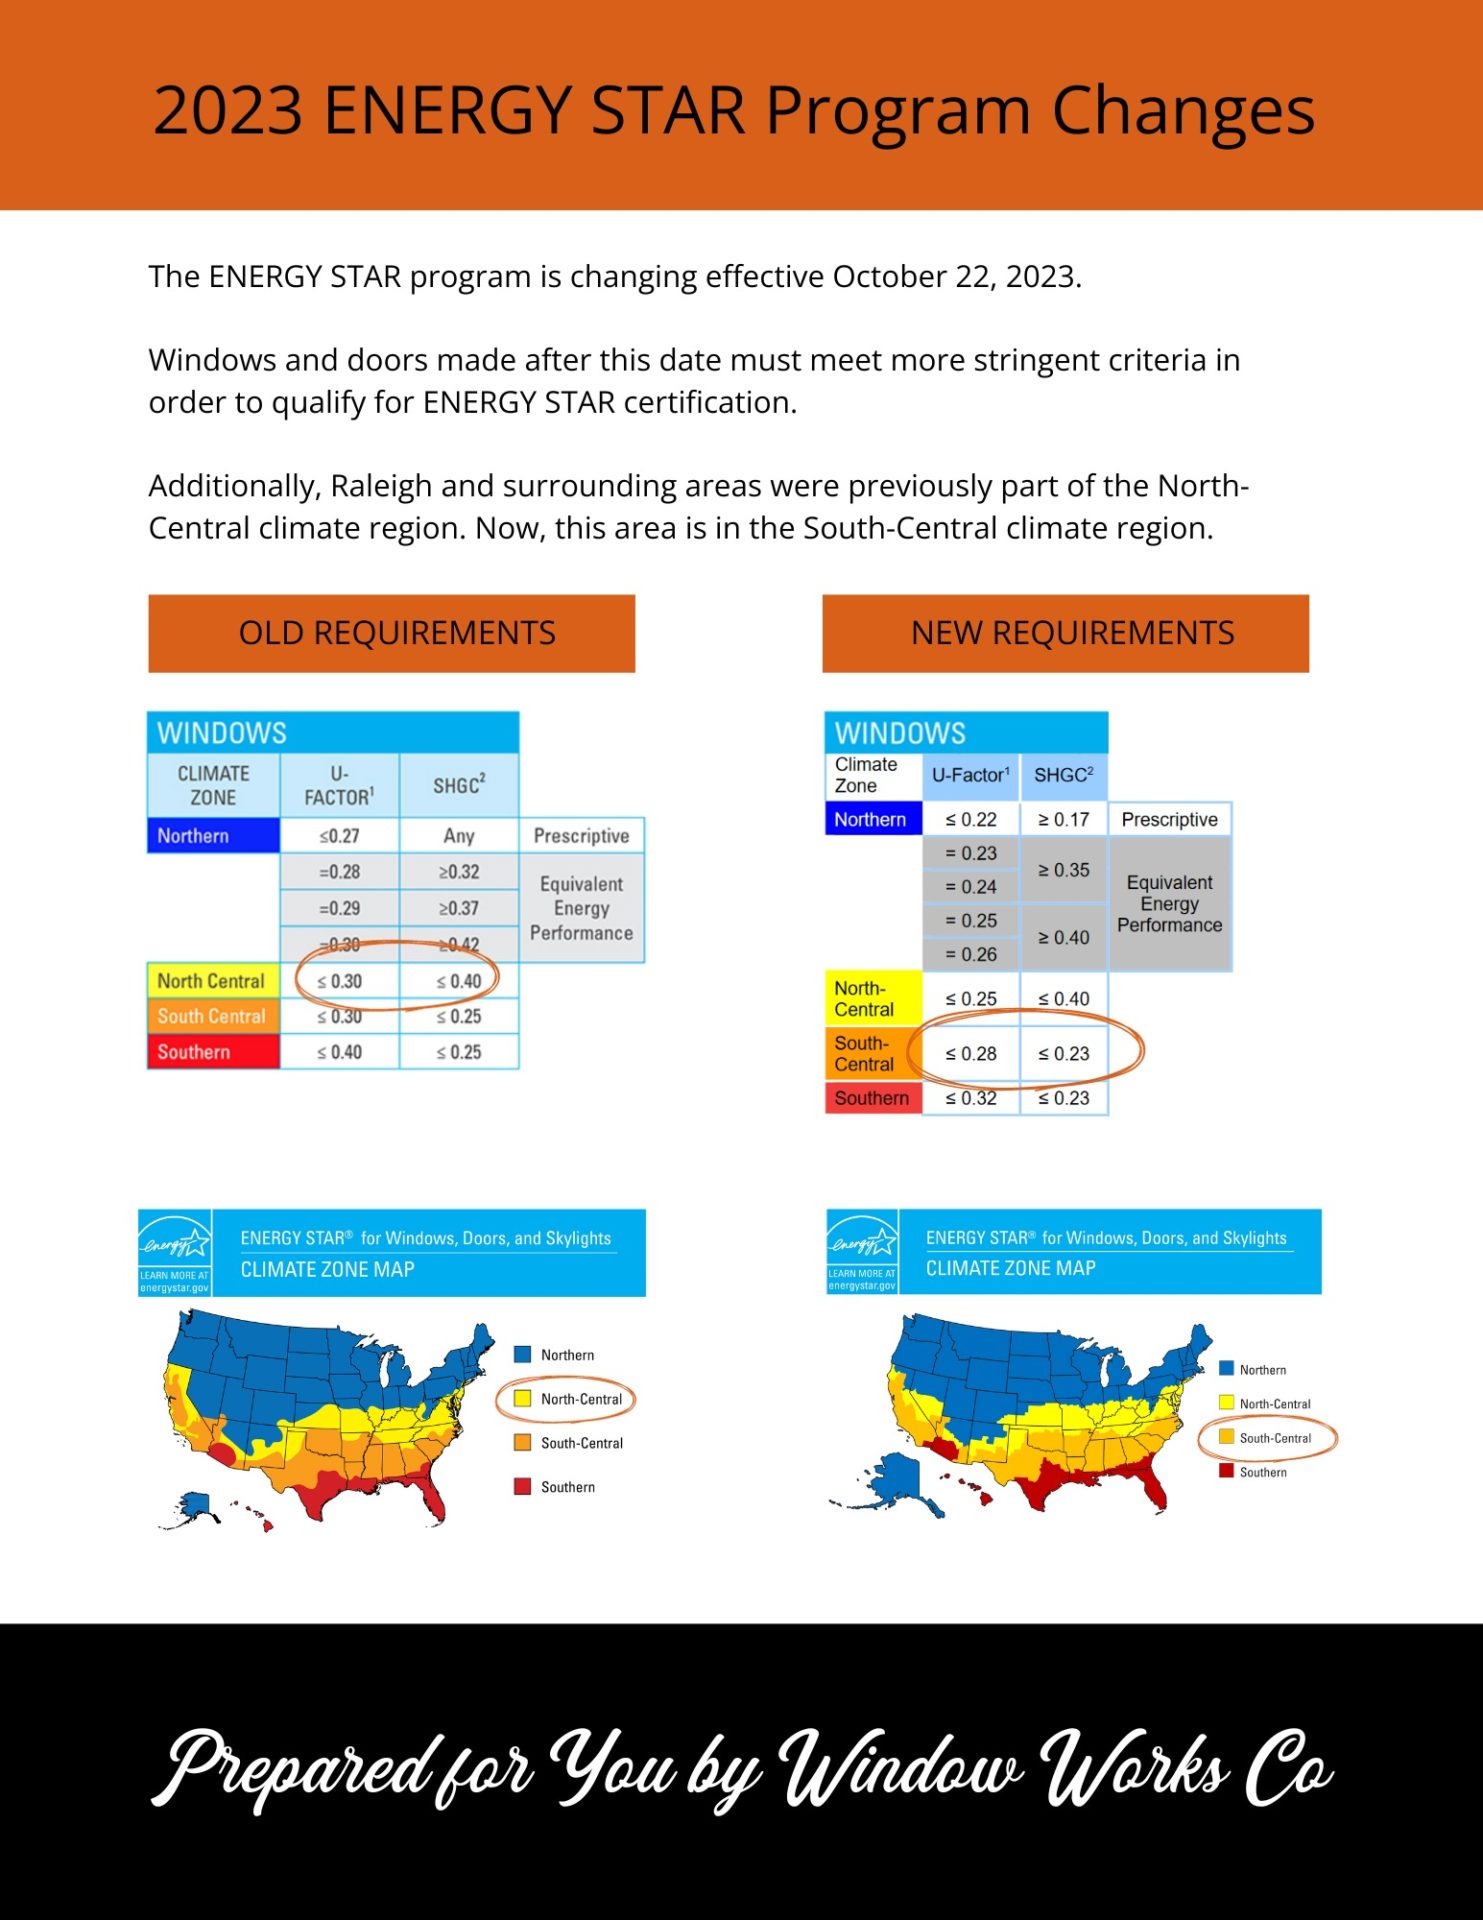 Printable prepared by Window Works Co showing old versus new energy star requirements for windows and energy star climate zone map changes effective October 23, 2023